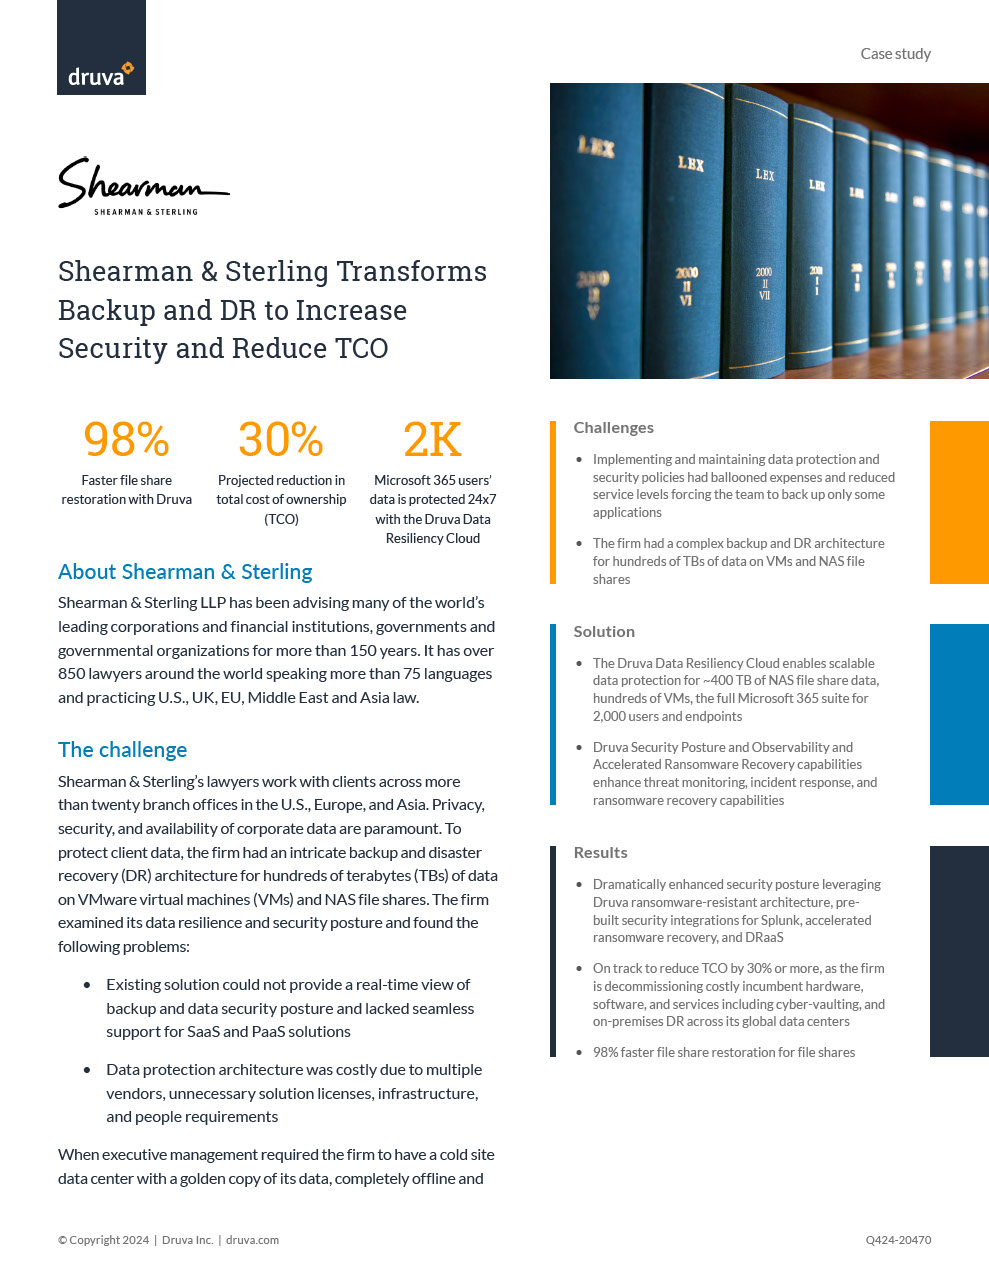 Shearman & Sterling Transforms Backup and DR to Increase Security and Reduce TCO